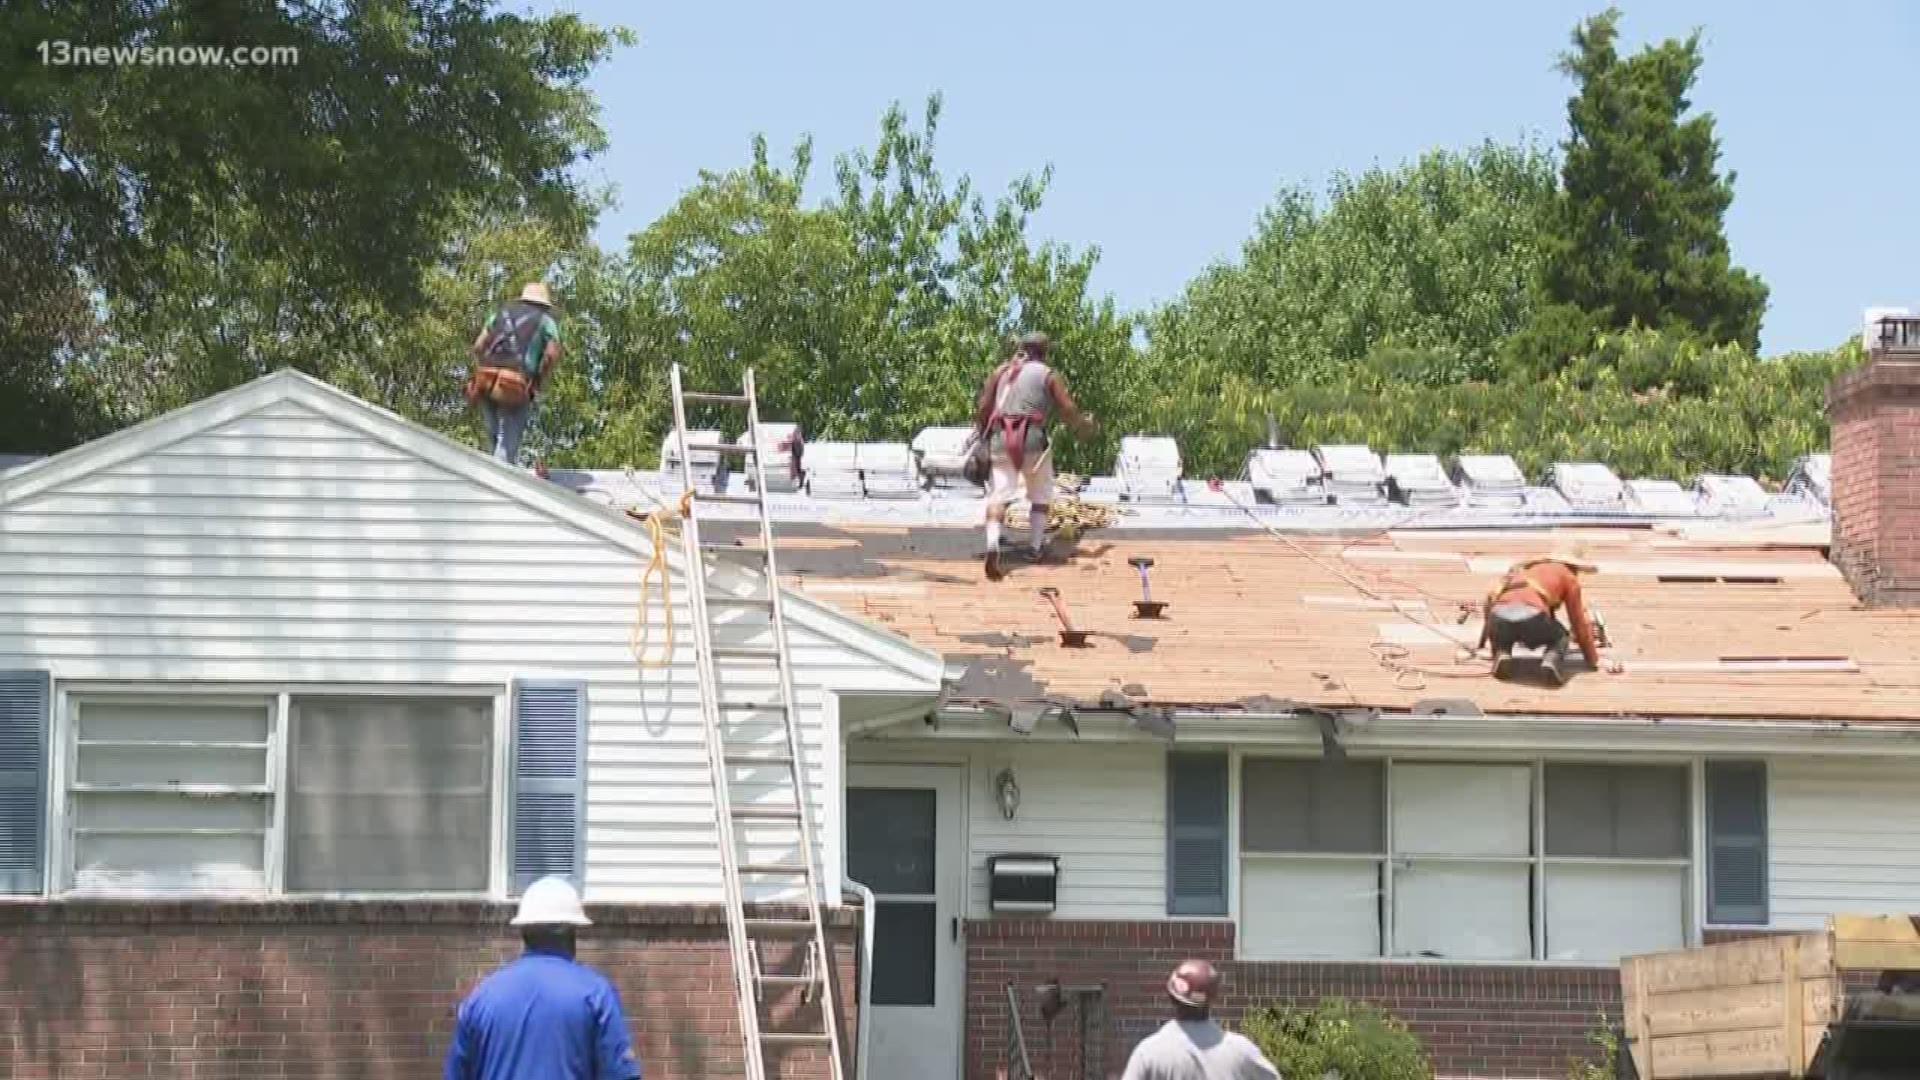 Hampton Roads is under an excessive heat warning, but roofers don't have the option to stay inside. Doctors recommend workers stay in hydrated and take frequent breaks.